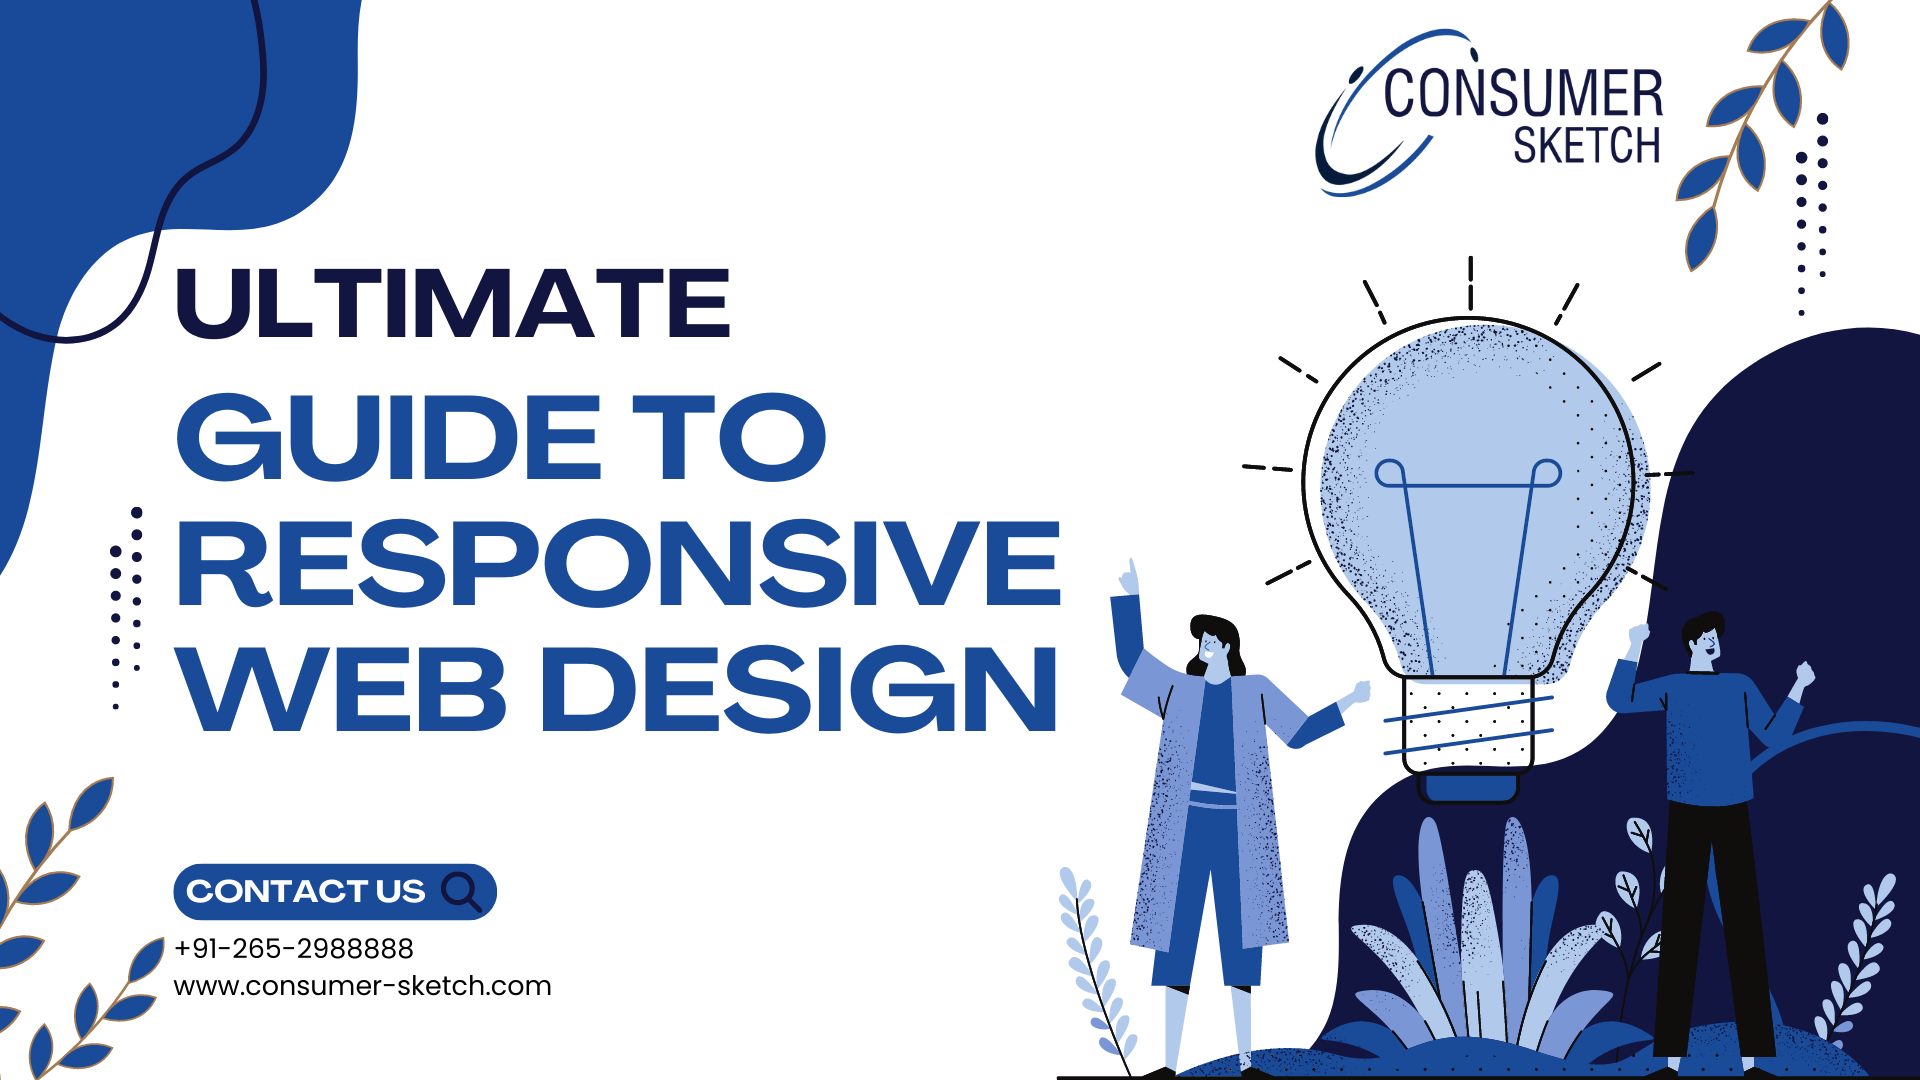 Ultimate Guide to Responsive Web Design